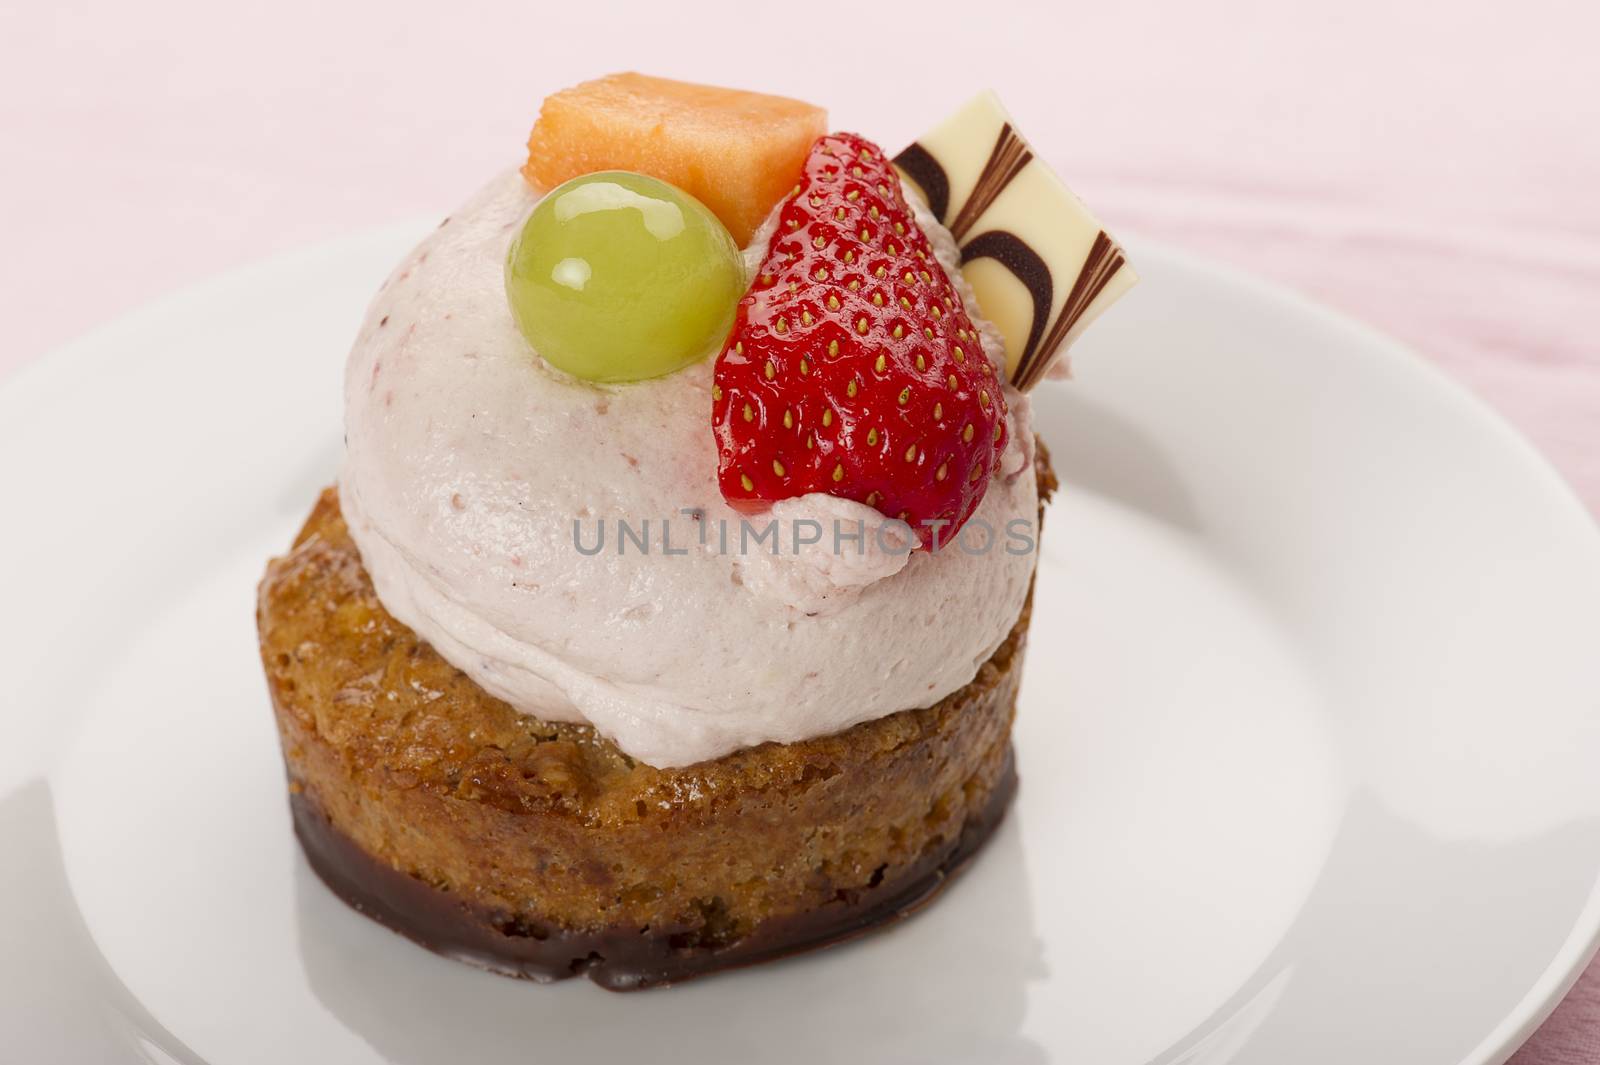 Mini cake topped with creamy mousse and fruit by MOELLERTHOMSEN